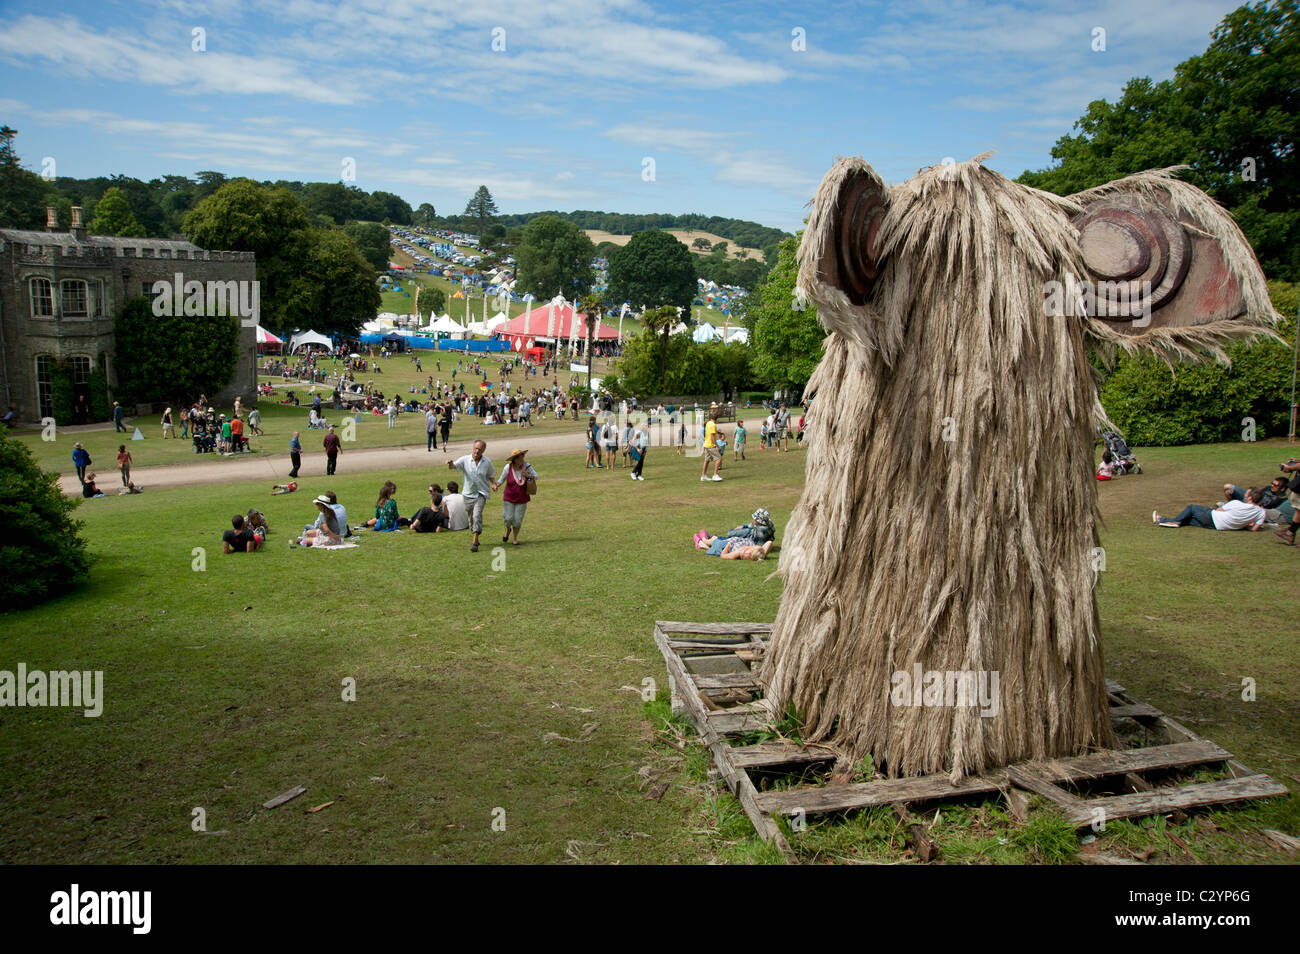 The rodent head on th hill at the Port Eliot Literary Festival St Germans Cornwall UK Stock Photo